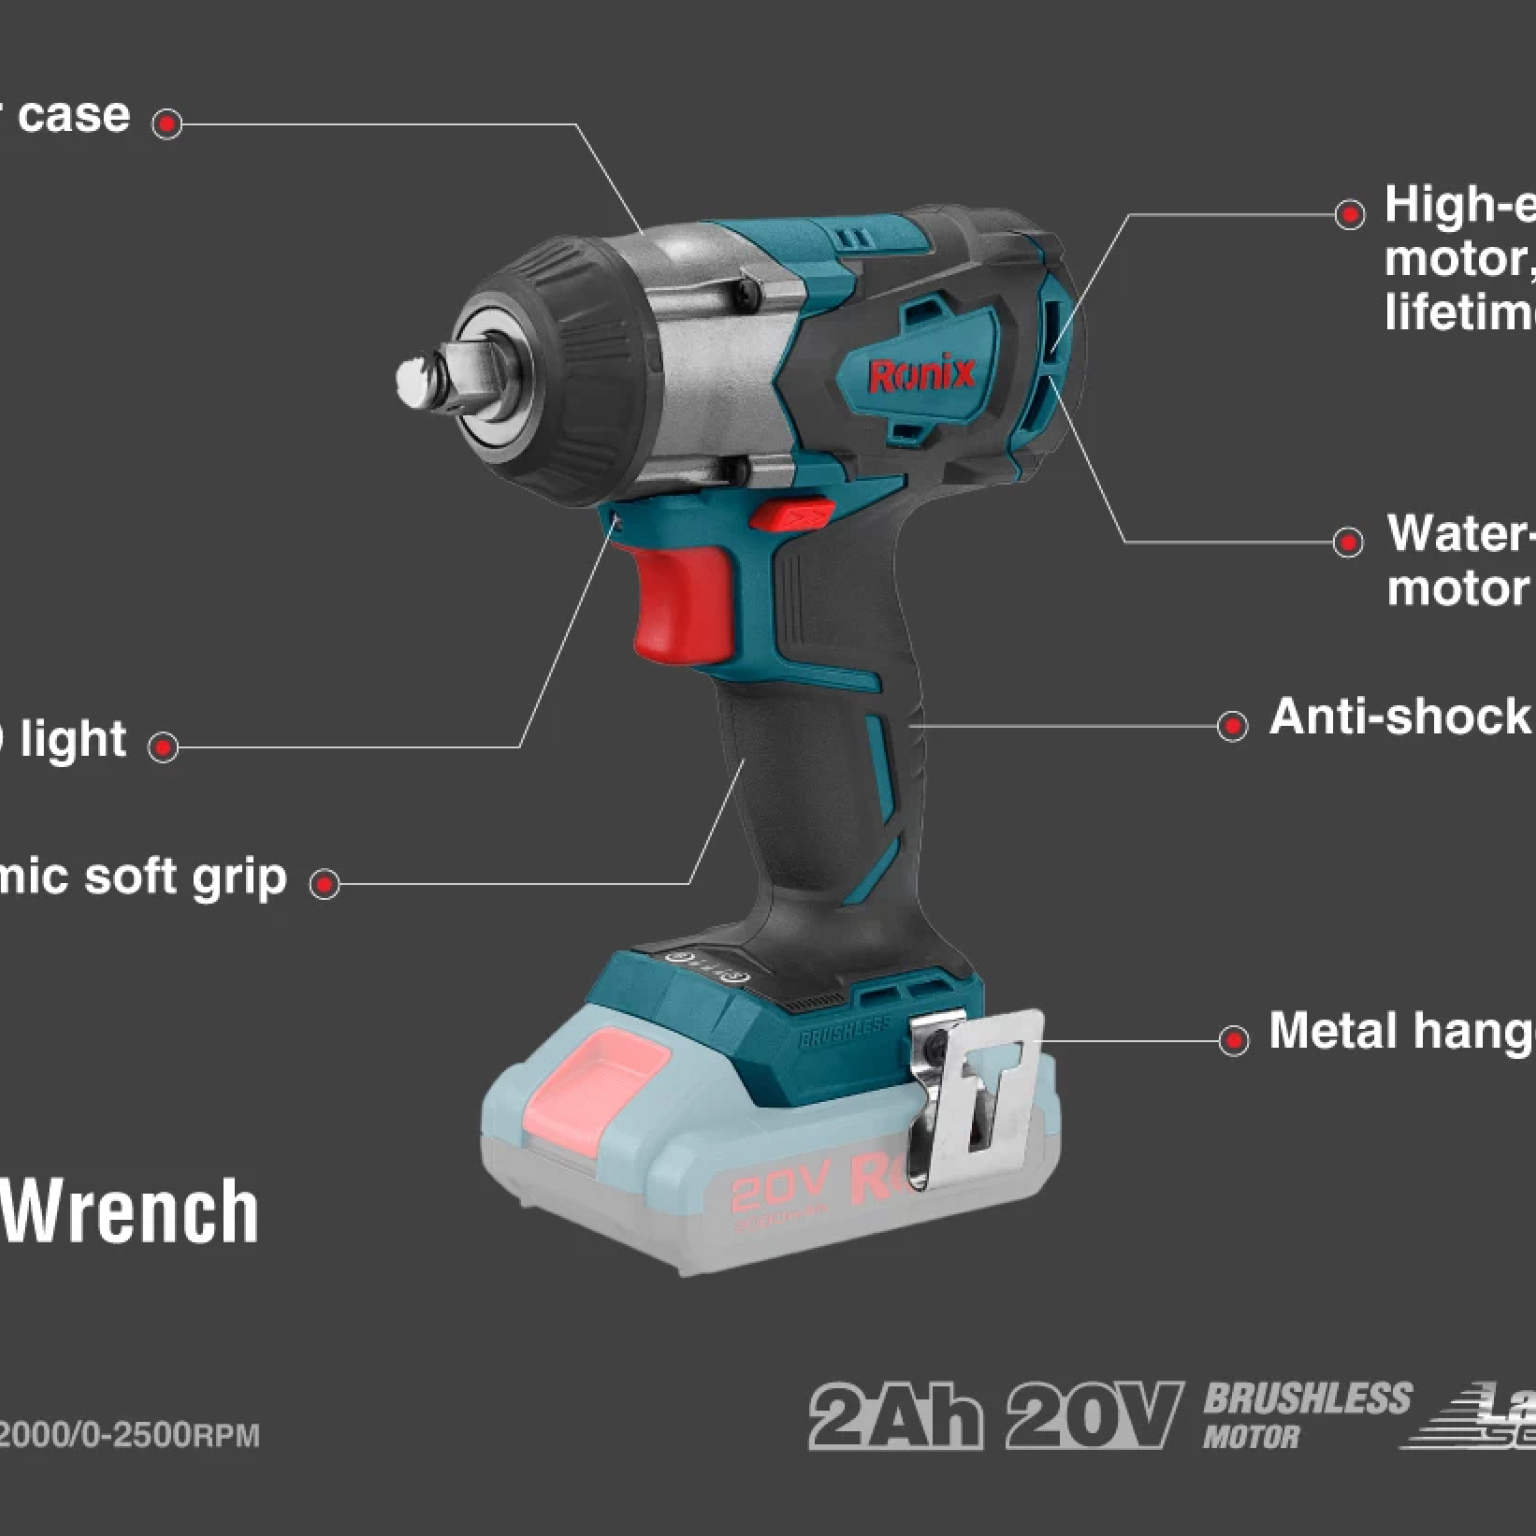 20V, 350N.M, cordless, impact wrench, brushless series, no battery, RONIX 8907